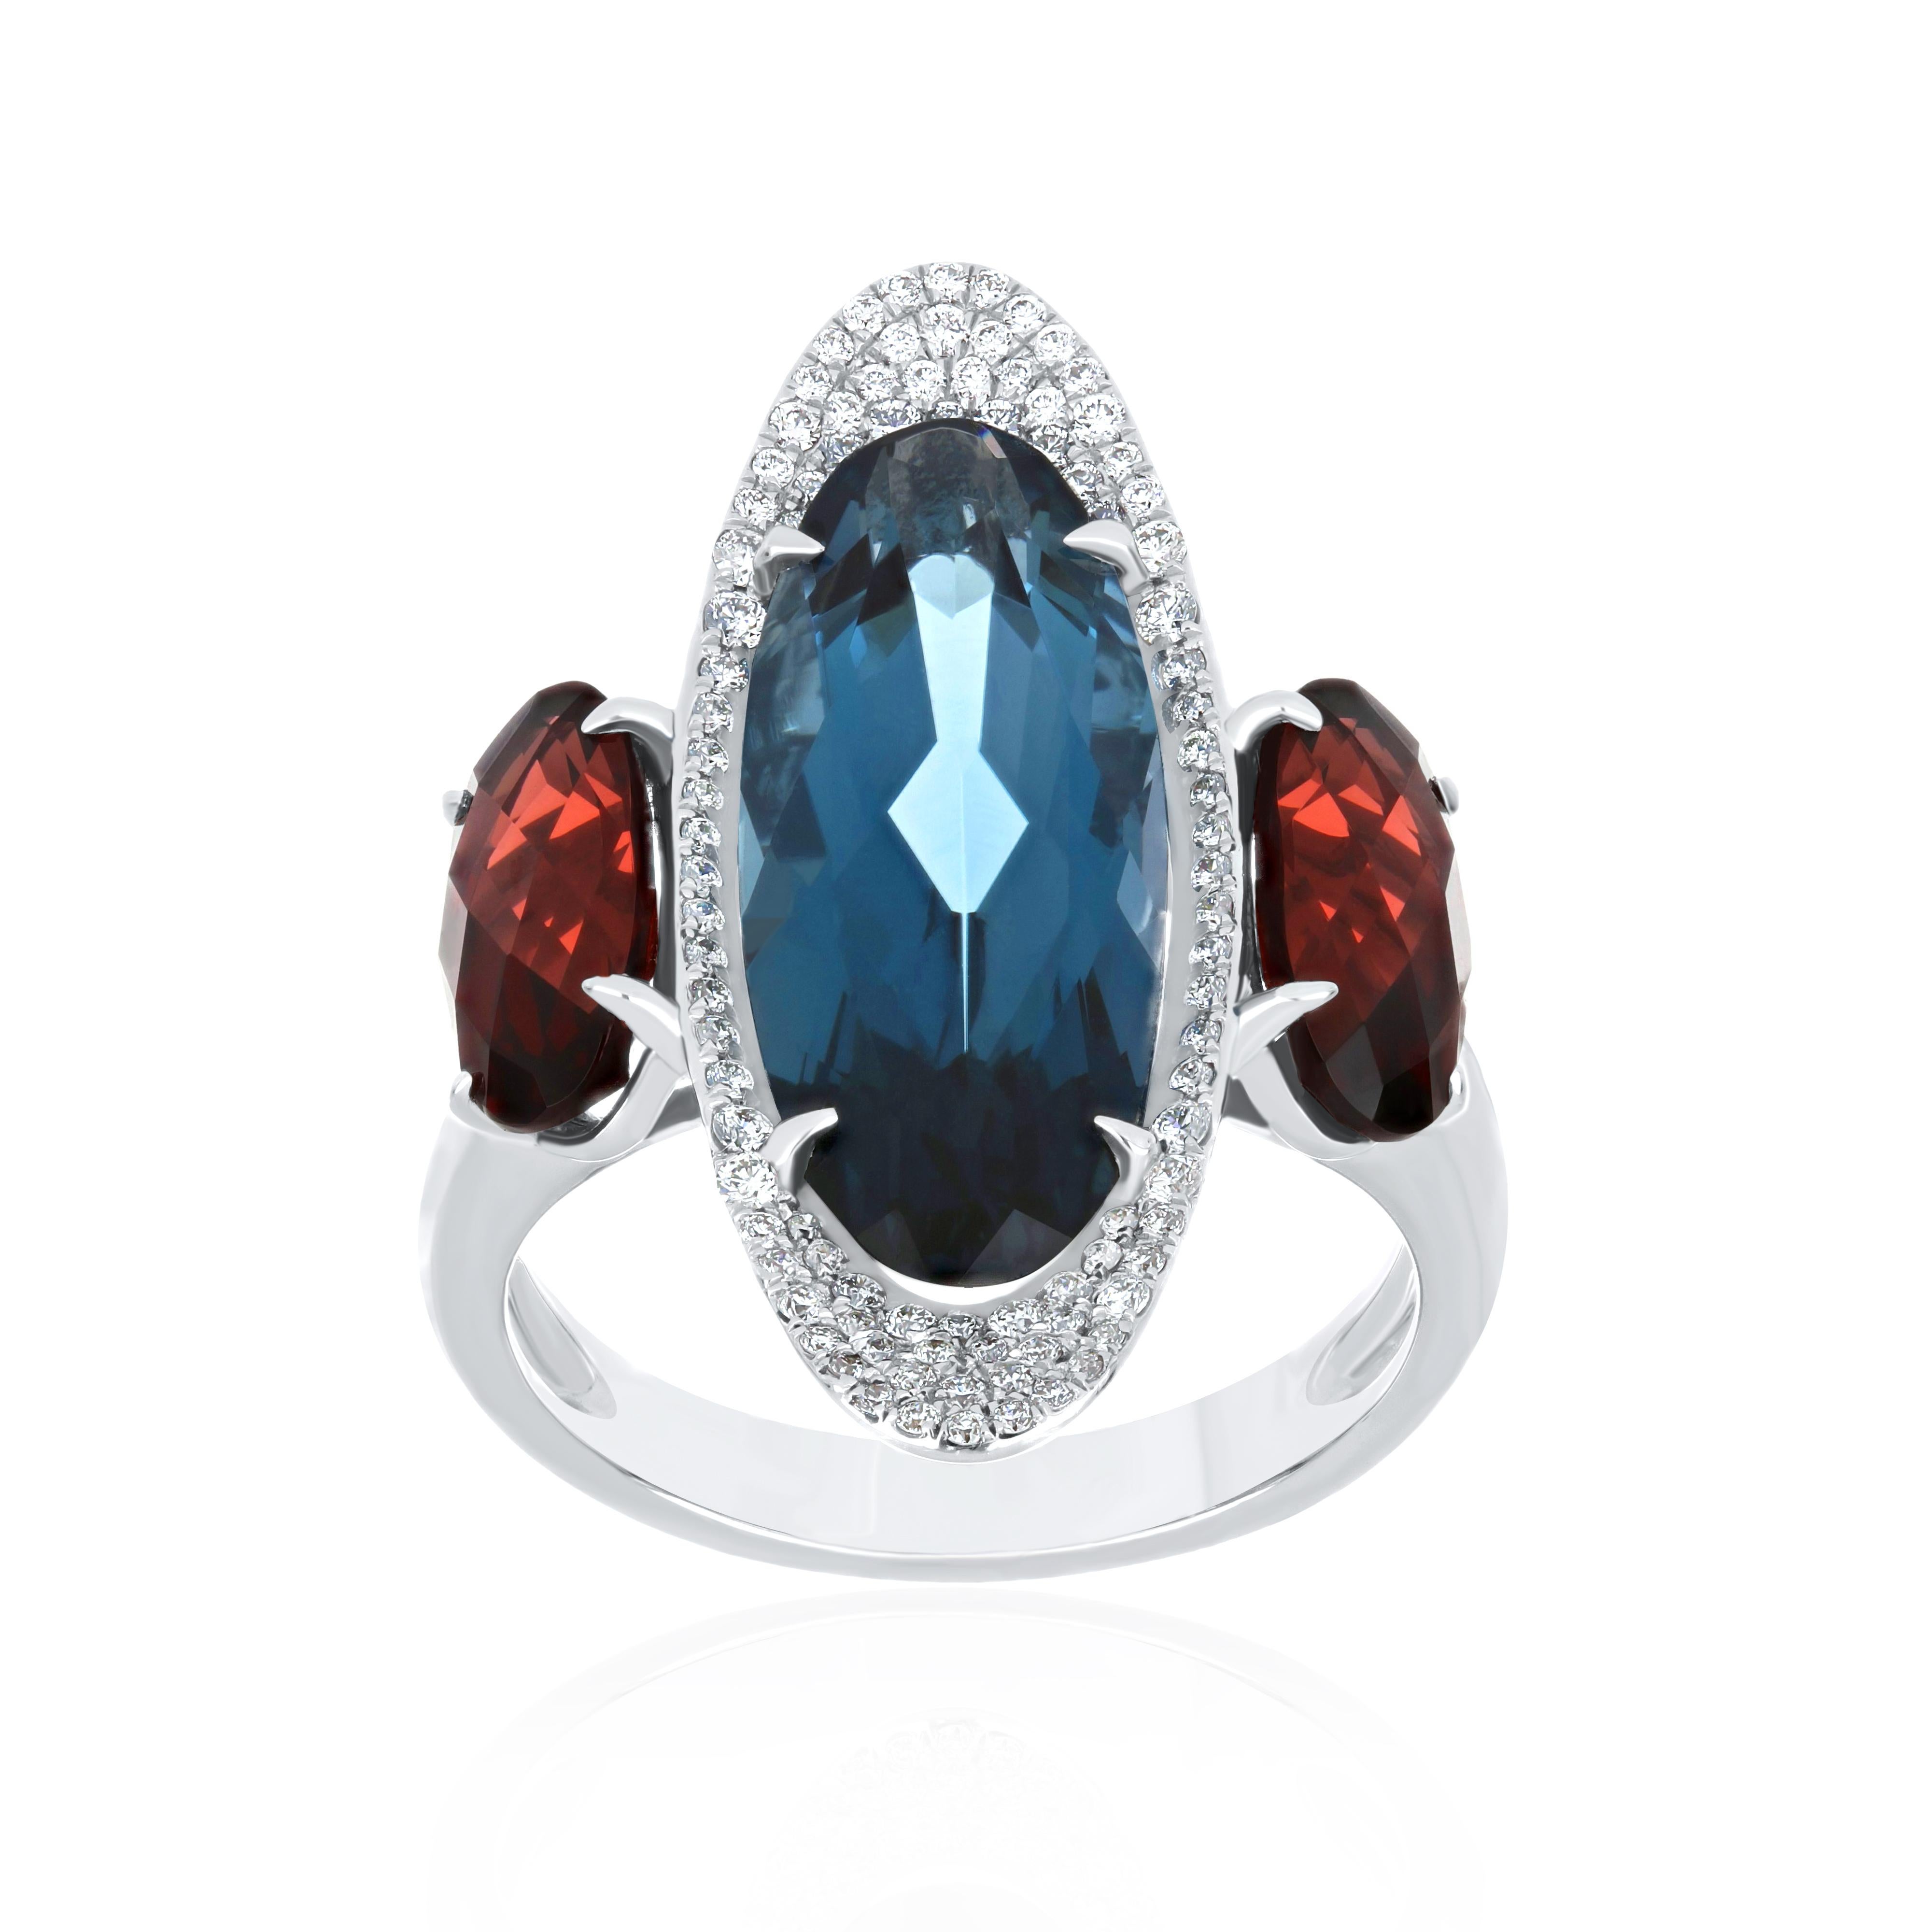 Elegant and exquisitely detailed 14 Karat White Gold Ring, Fancy Elongated Oval Shape London Blue Topaz weight 6.58Cts(approx.), Oval Shape Garnet weight 3.32Cts(approx.), accented with micro pave Diamond 0.358Cts (approx.) Beautifully Hand crafted